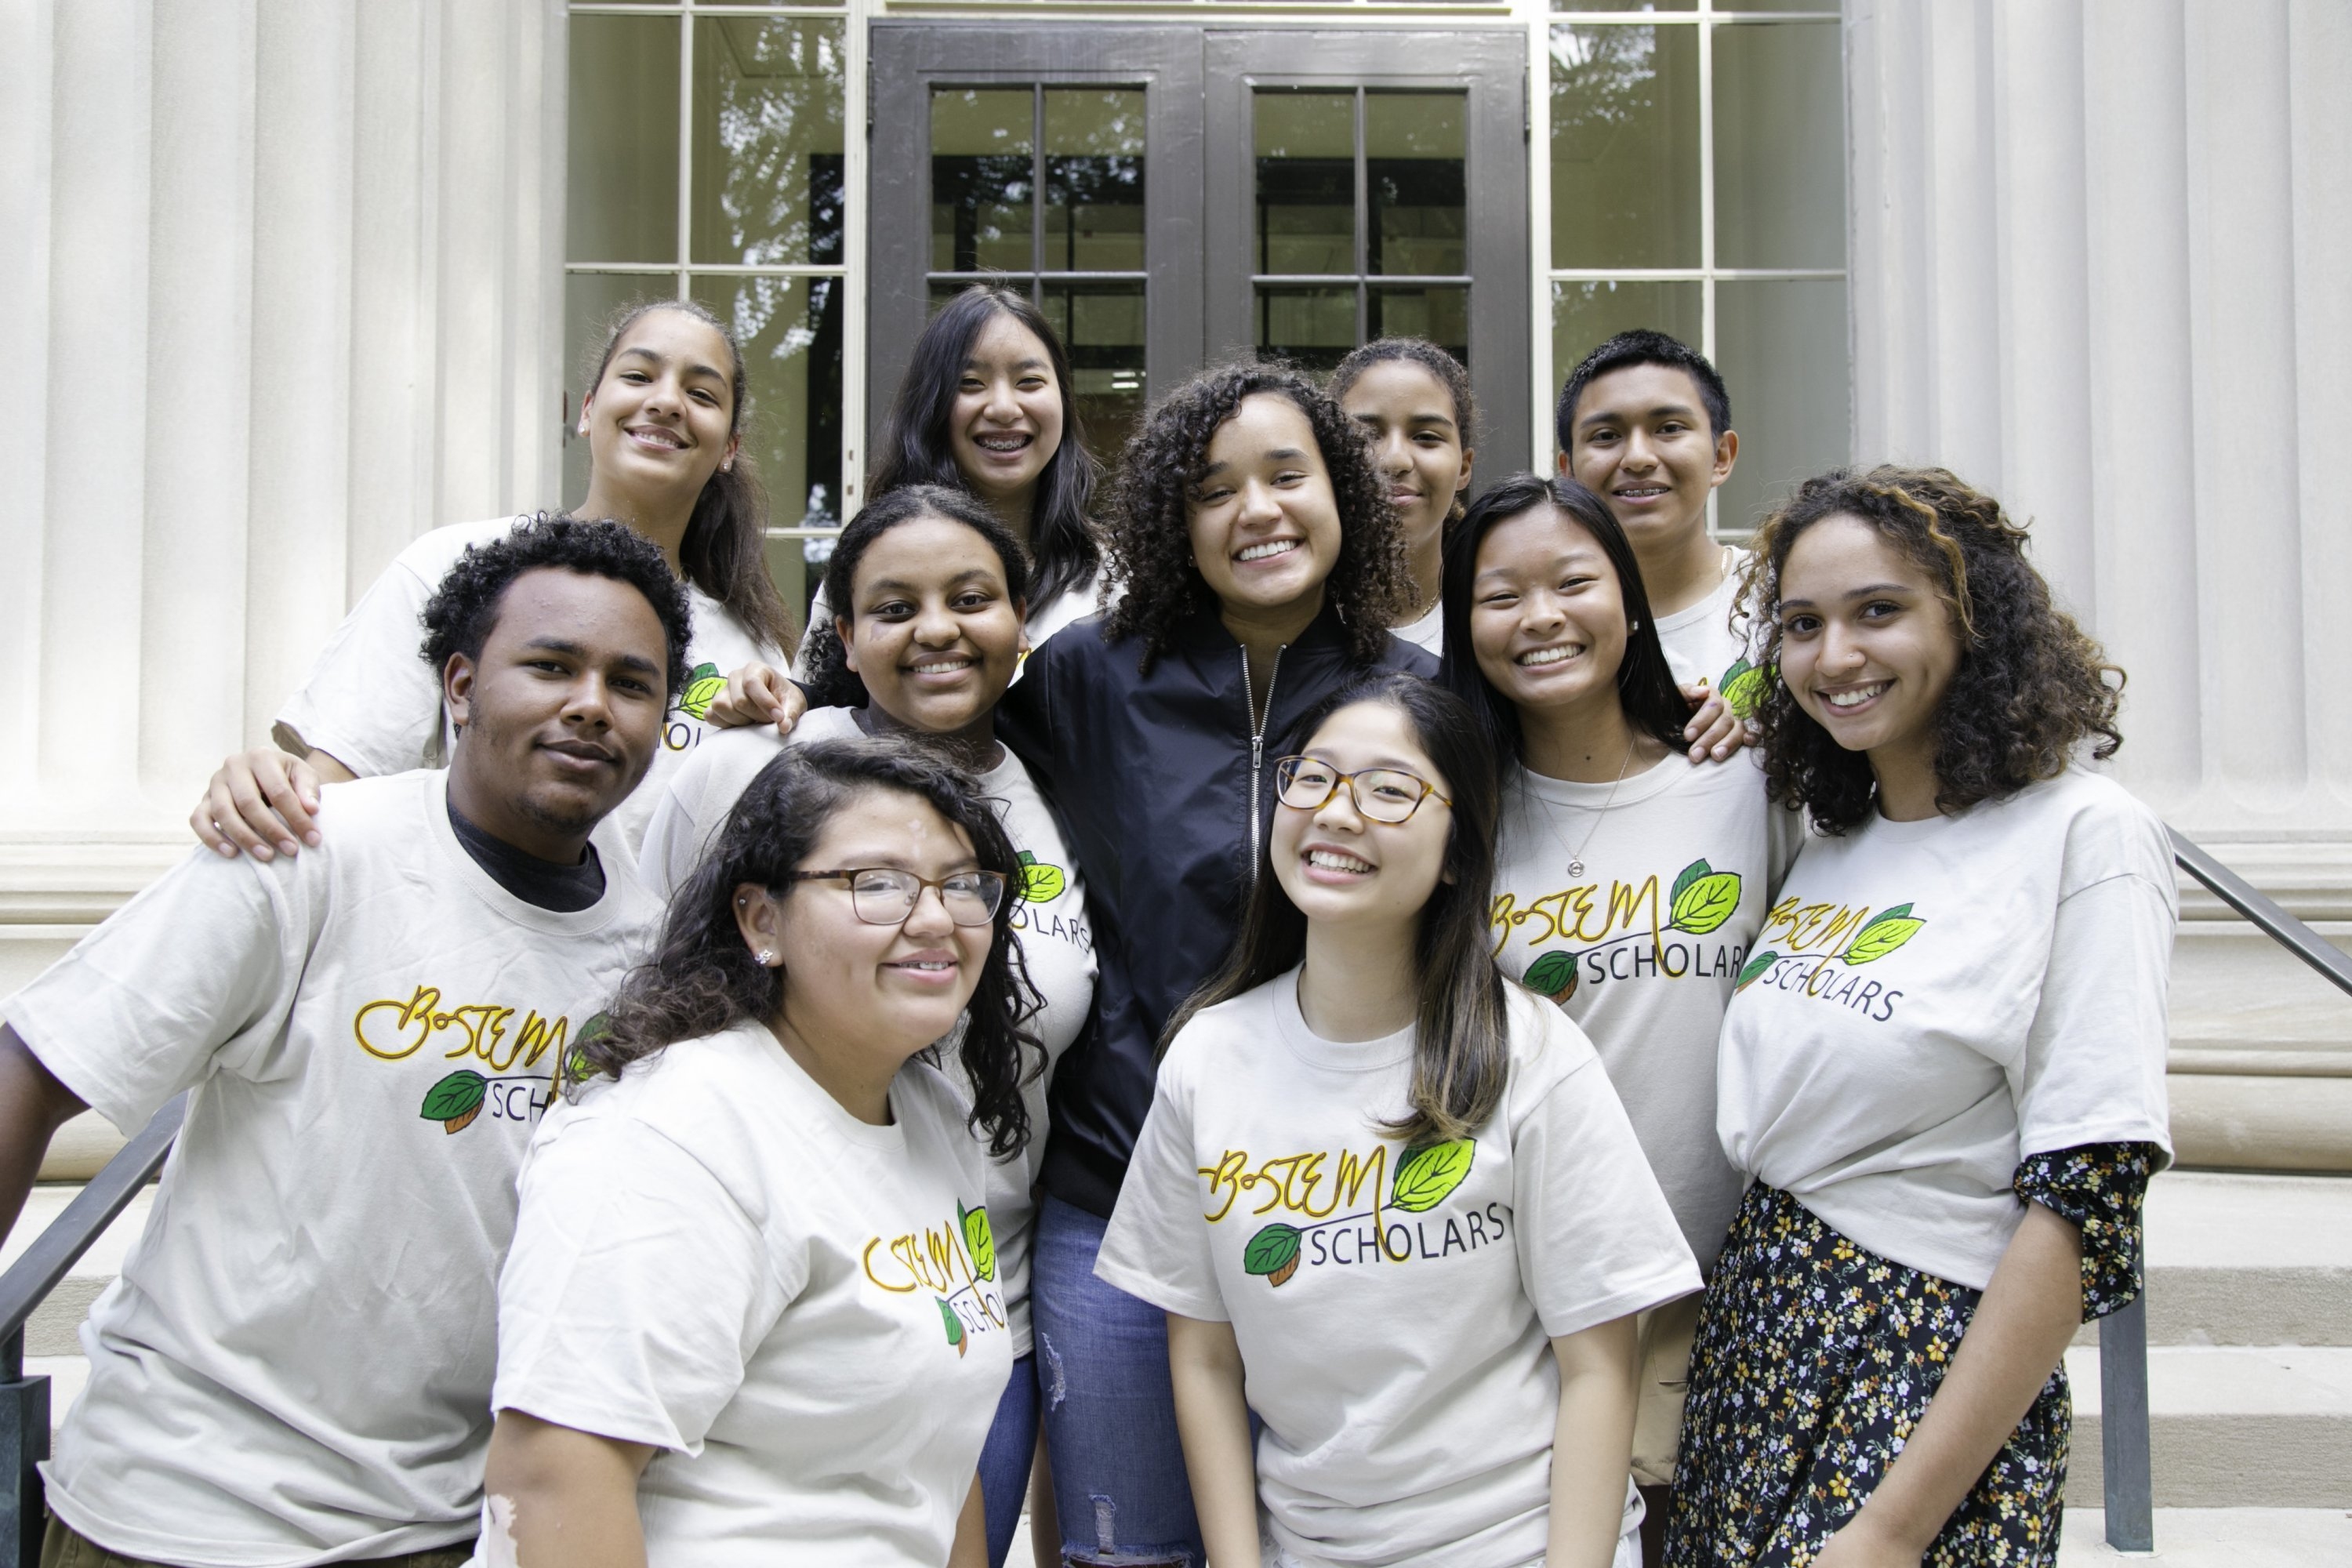 Previous MIT Community Service Fund grant recipient MIT BoSTEM Scholars Academy gathers for a group photo on MIT’s campus. Grant applications are open twice a year in October and May. 